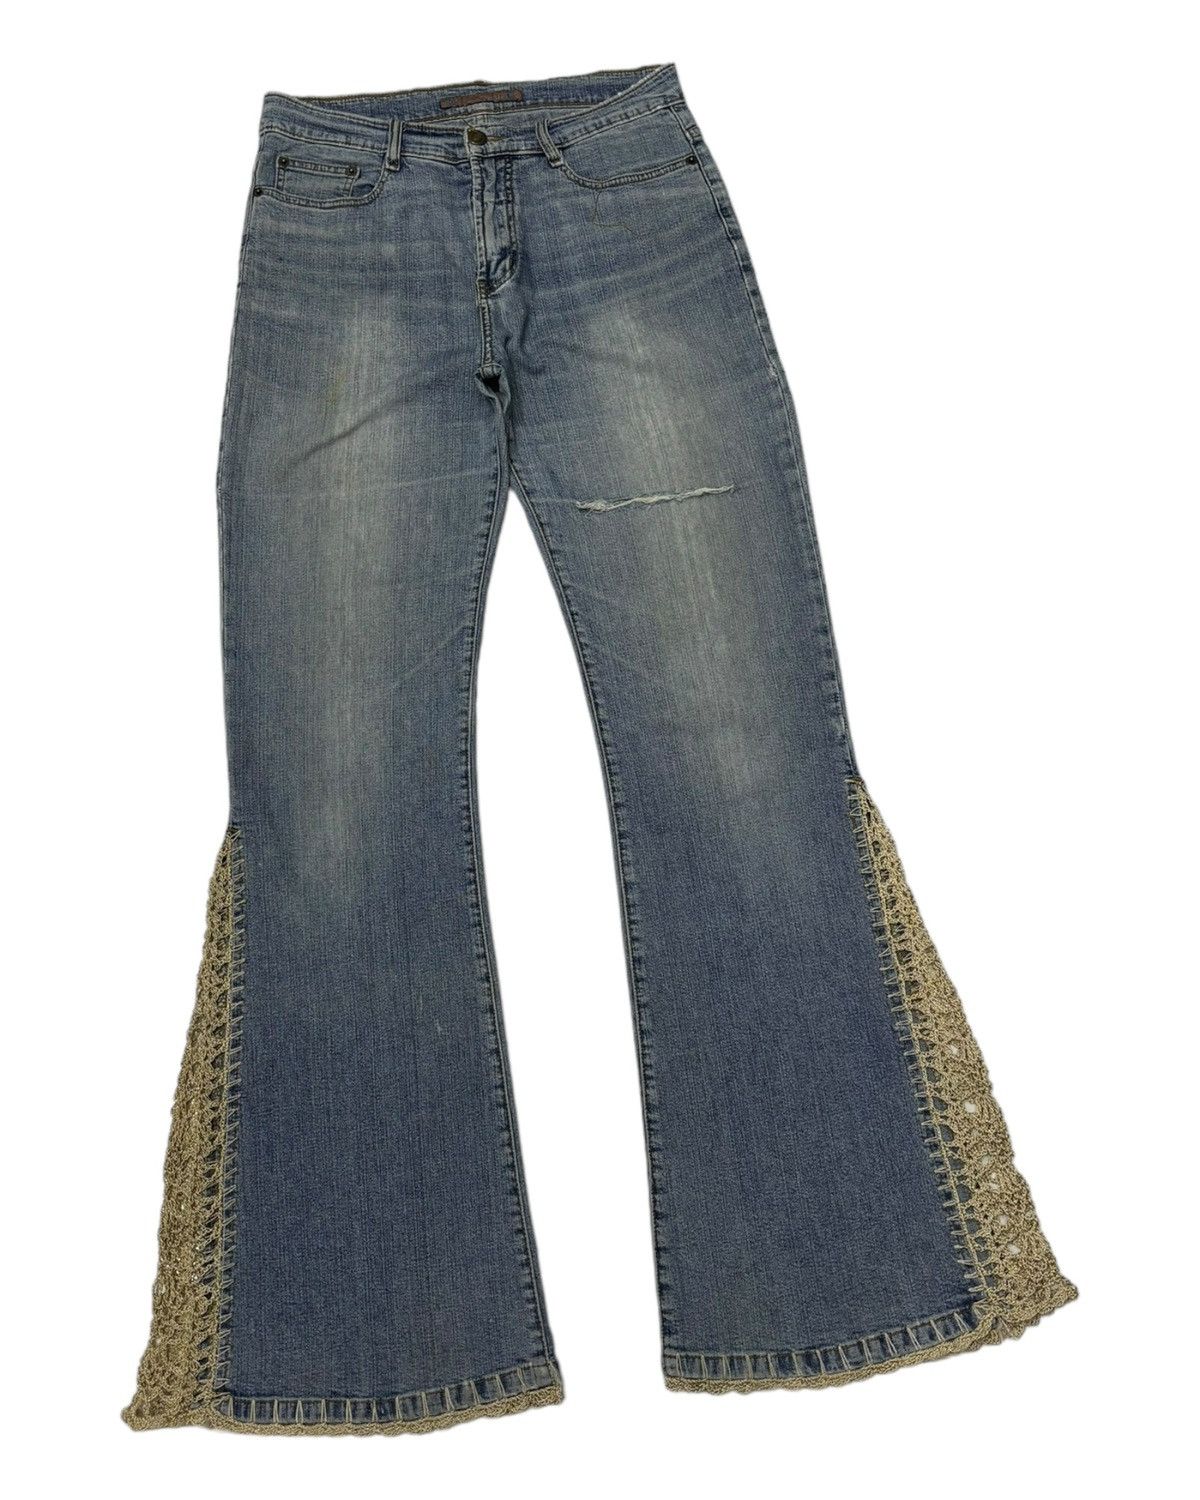 Designer - Vintage Flared Jeans Toco Toco Crochet Bootcut Jeans - 3